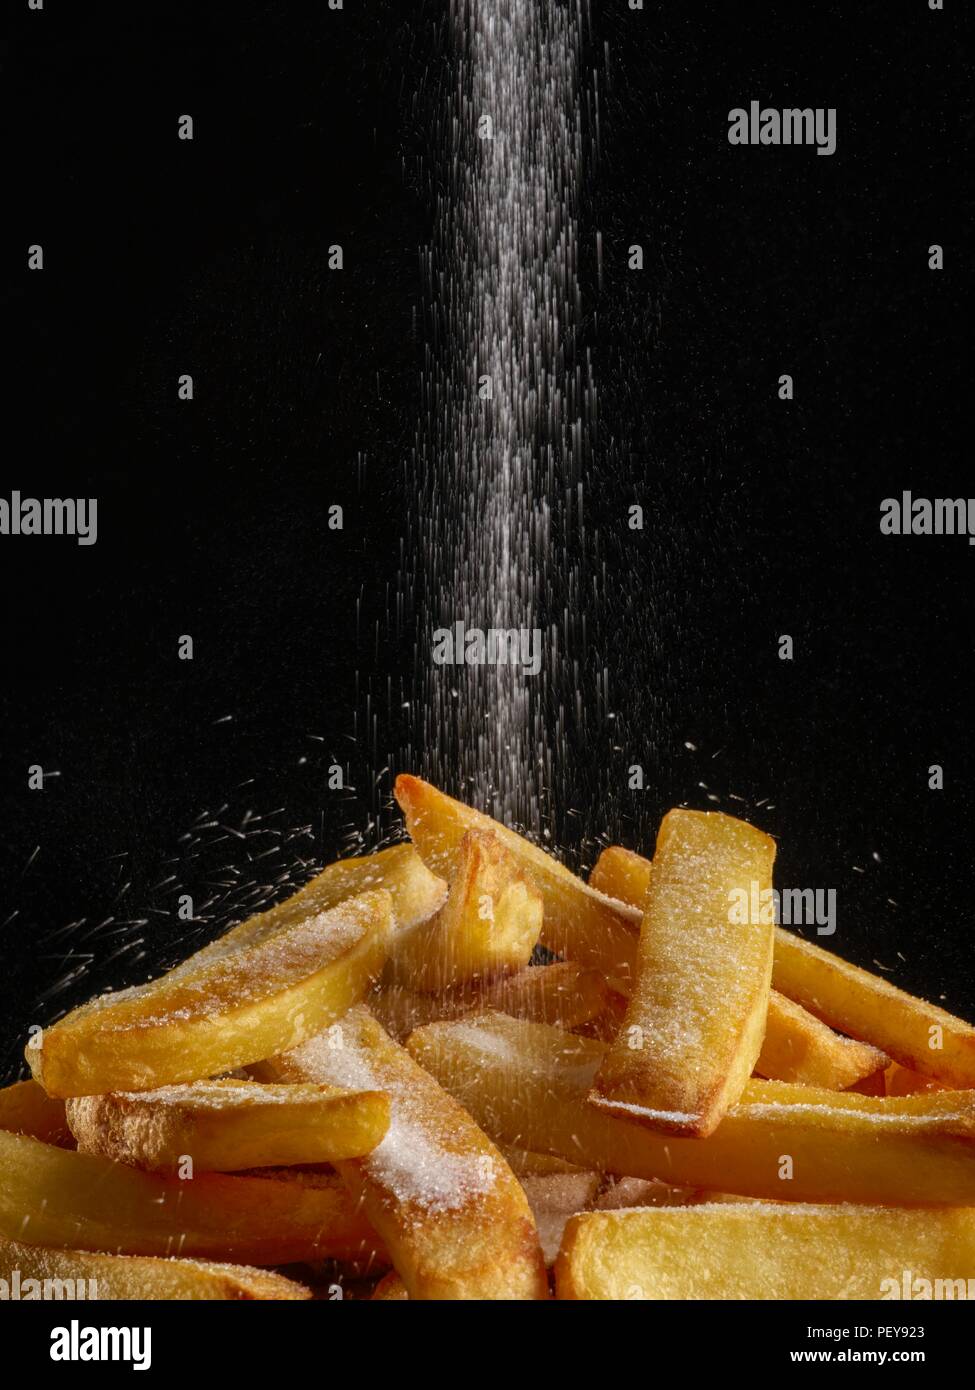 Salt pouring onto chips. Stock Photo